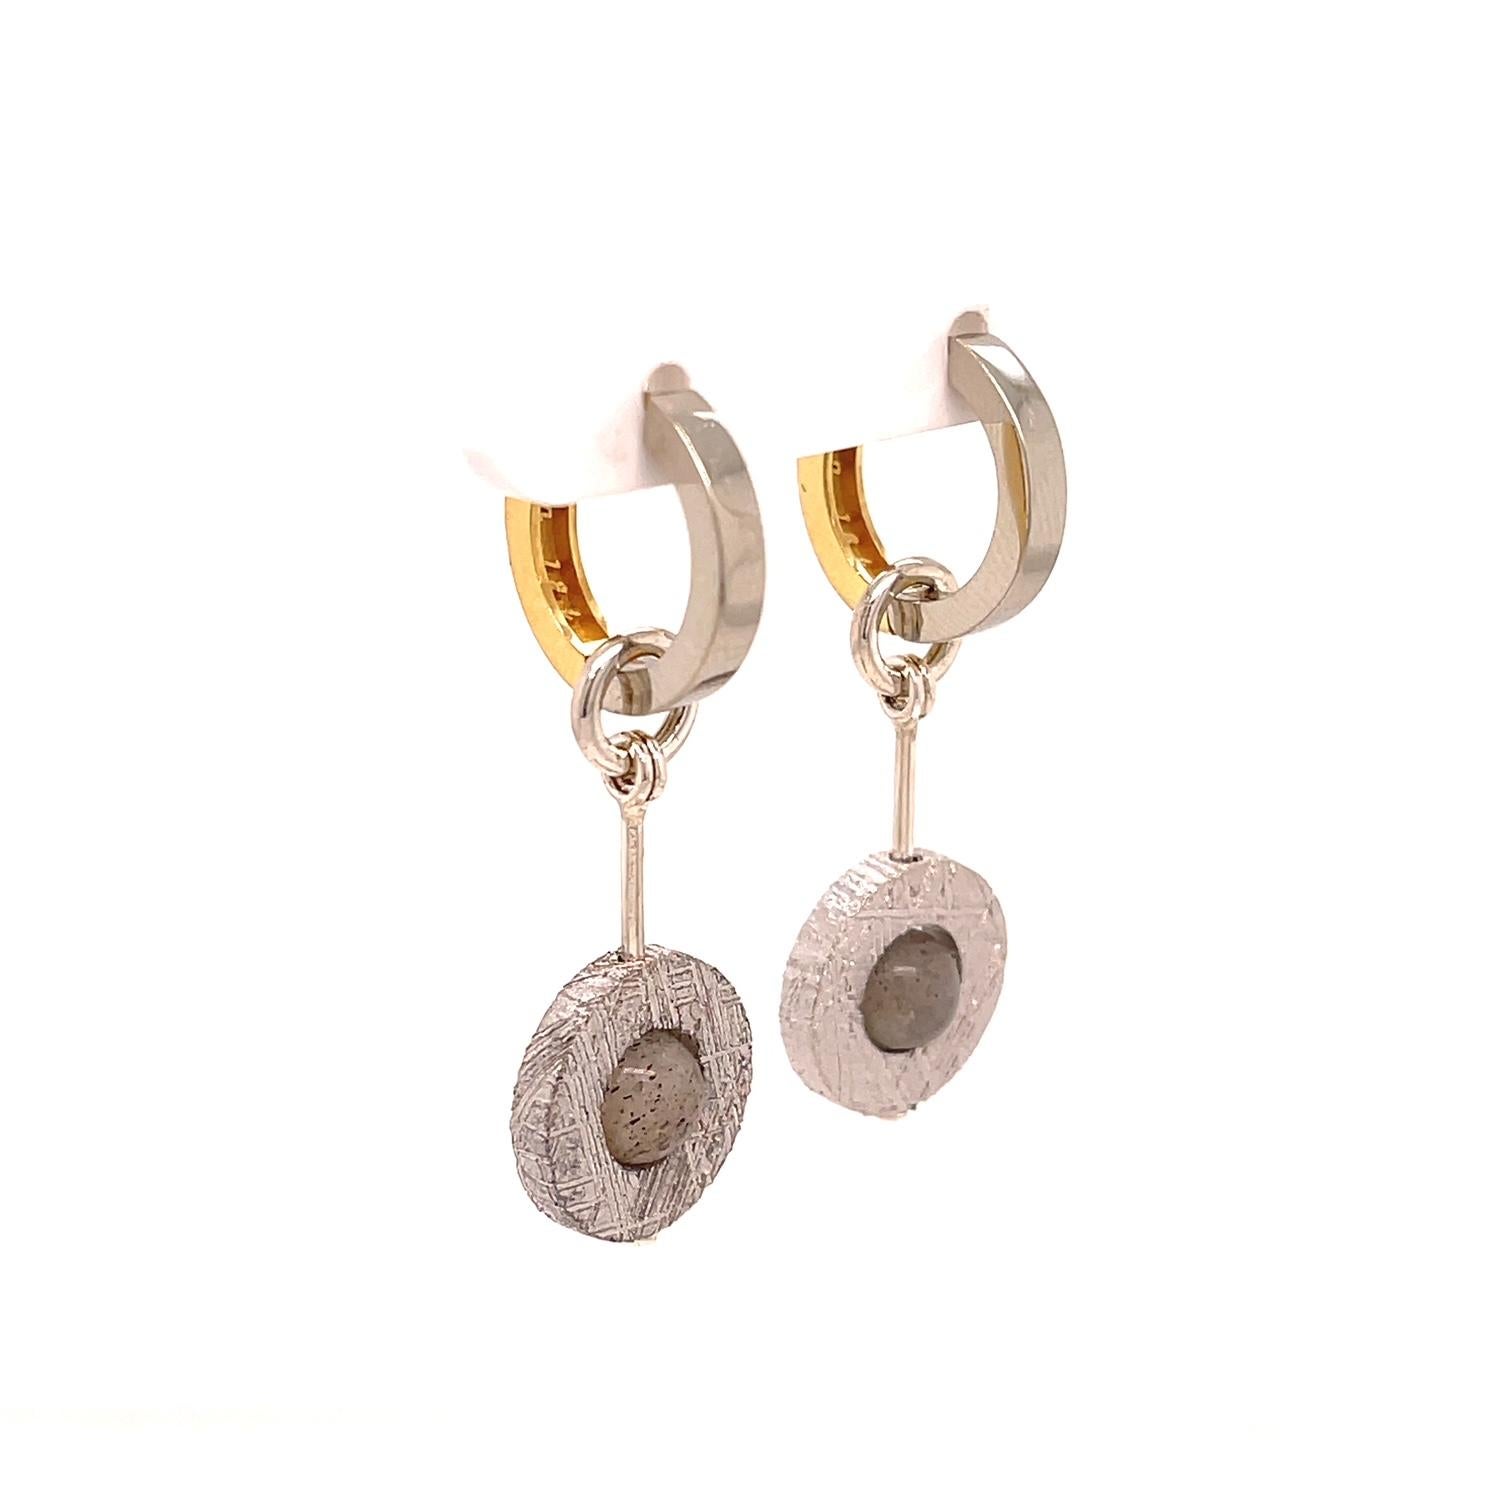 A pair of 18k yellow and white gold reversible huggie earrings, with a pair of donut shaped meteorite Jackets, made in oxidized sterling silver. These earrings were made and designed by llyn strong.

Items sold separately upon request.